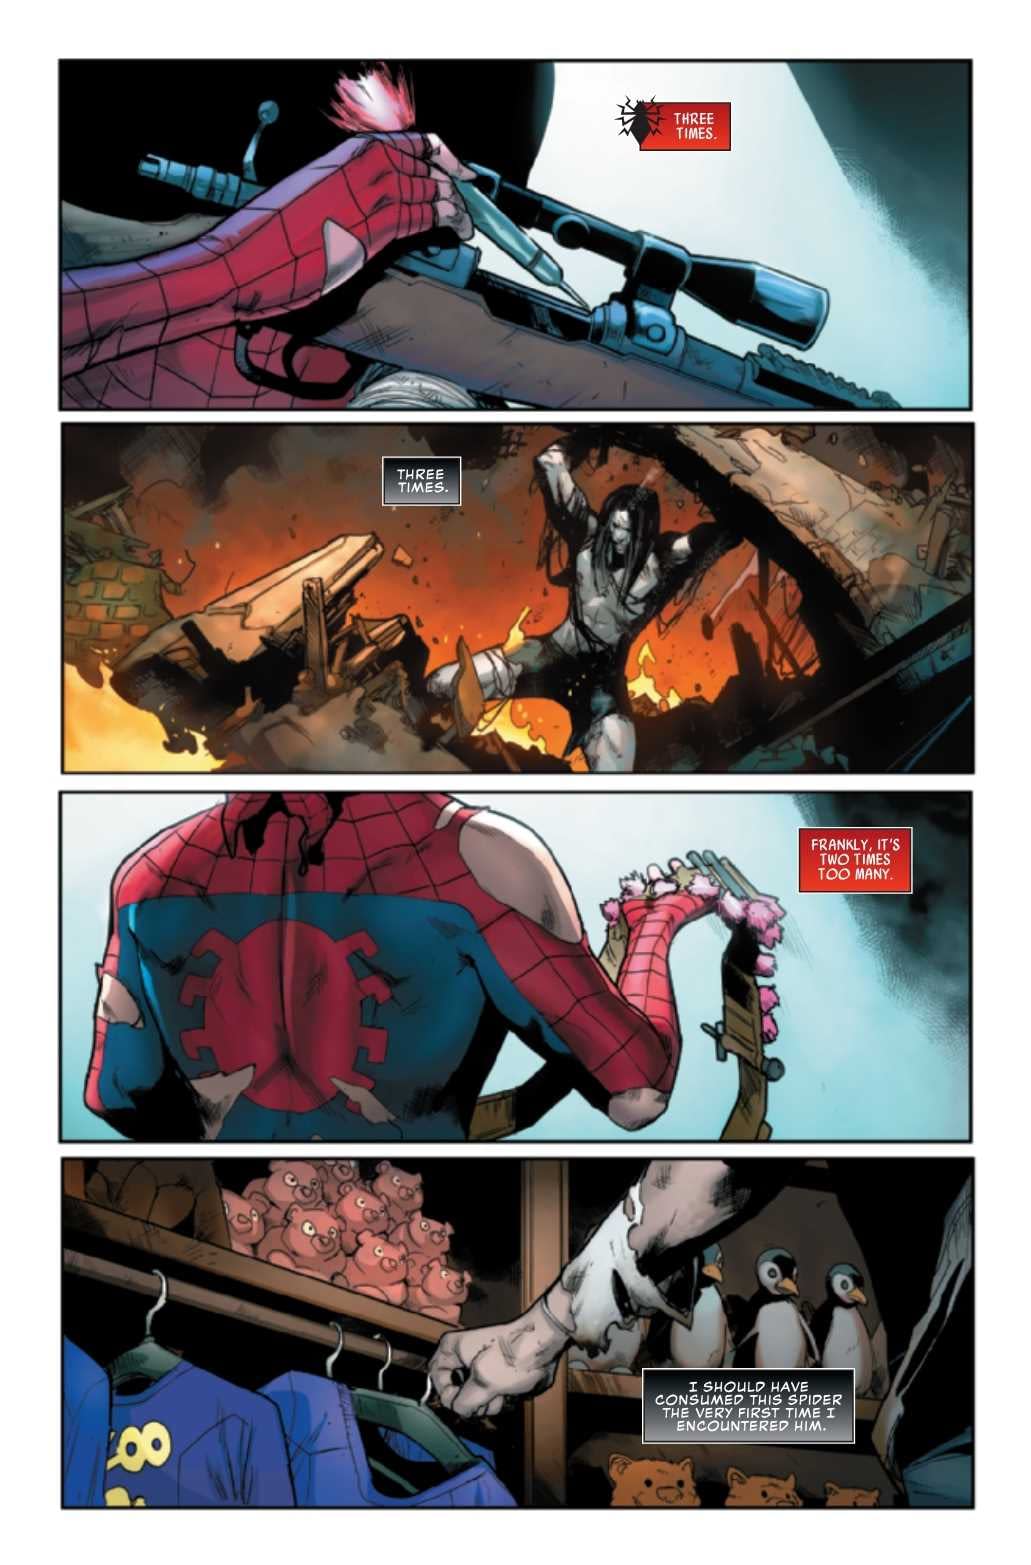 Spider-Man is Armed to the Teeth (With Guns) in Next Week's Peter Parker: Spectacular Spider-Man #313